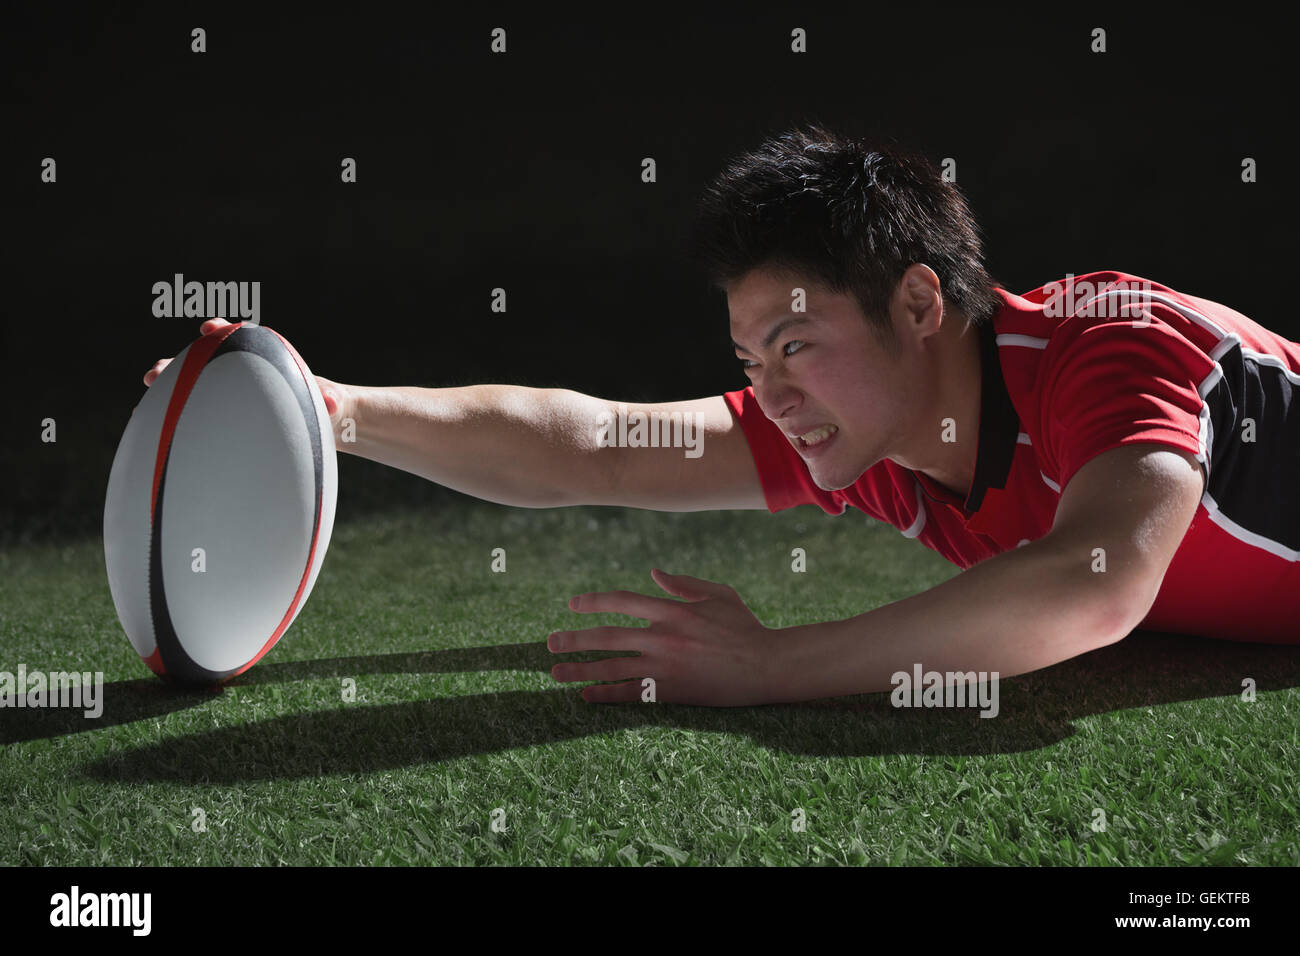 Portrait of Japanese rugby player diving to score a try Stock Photo